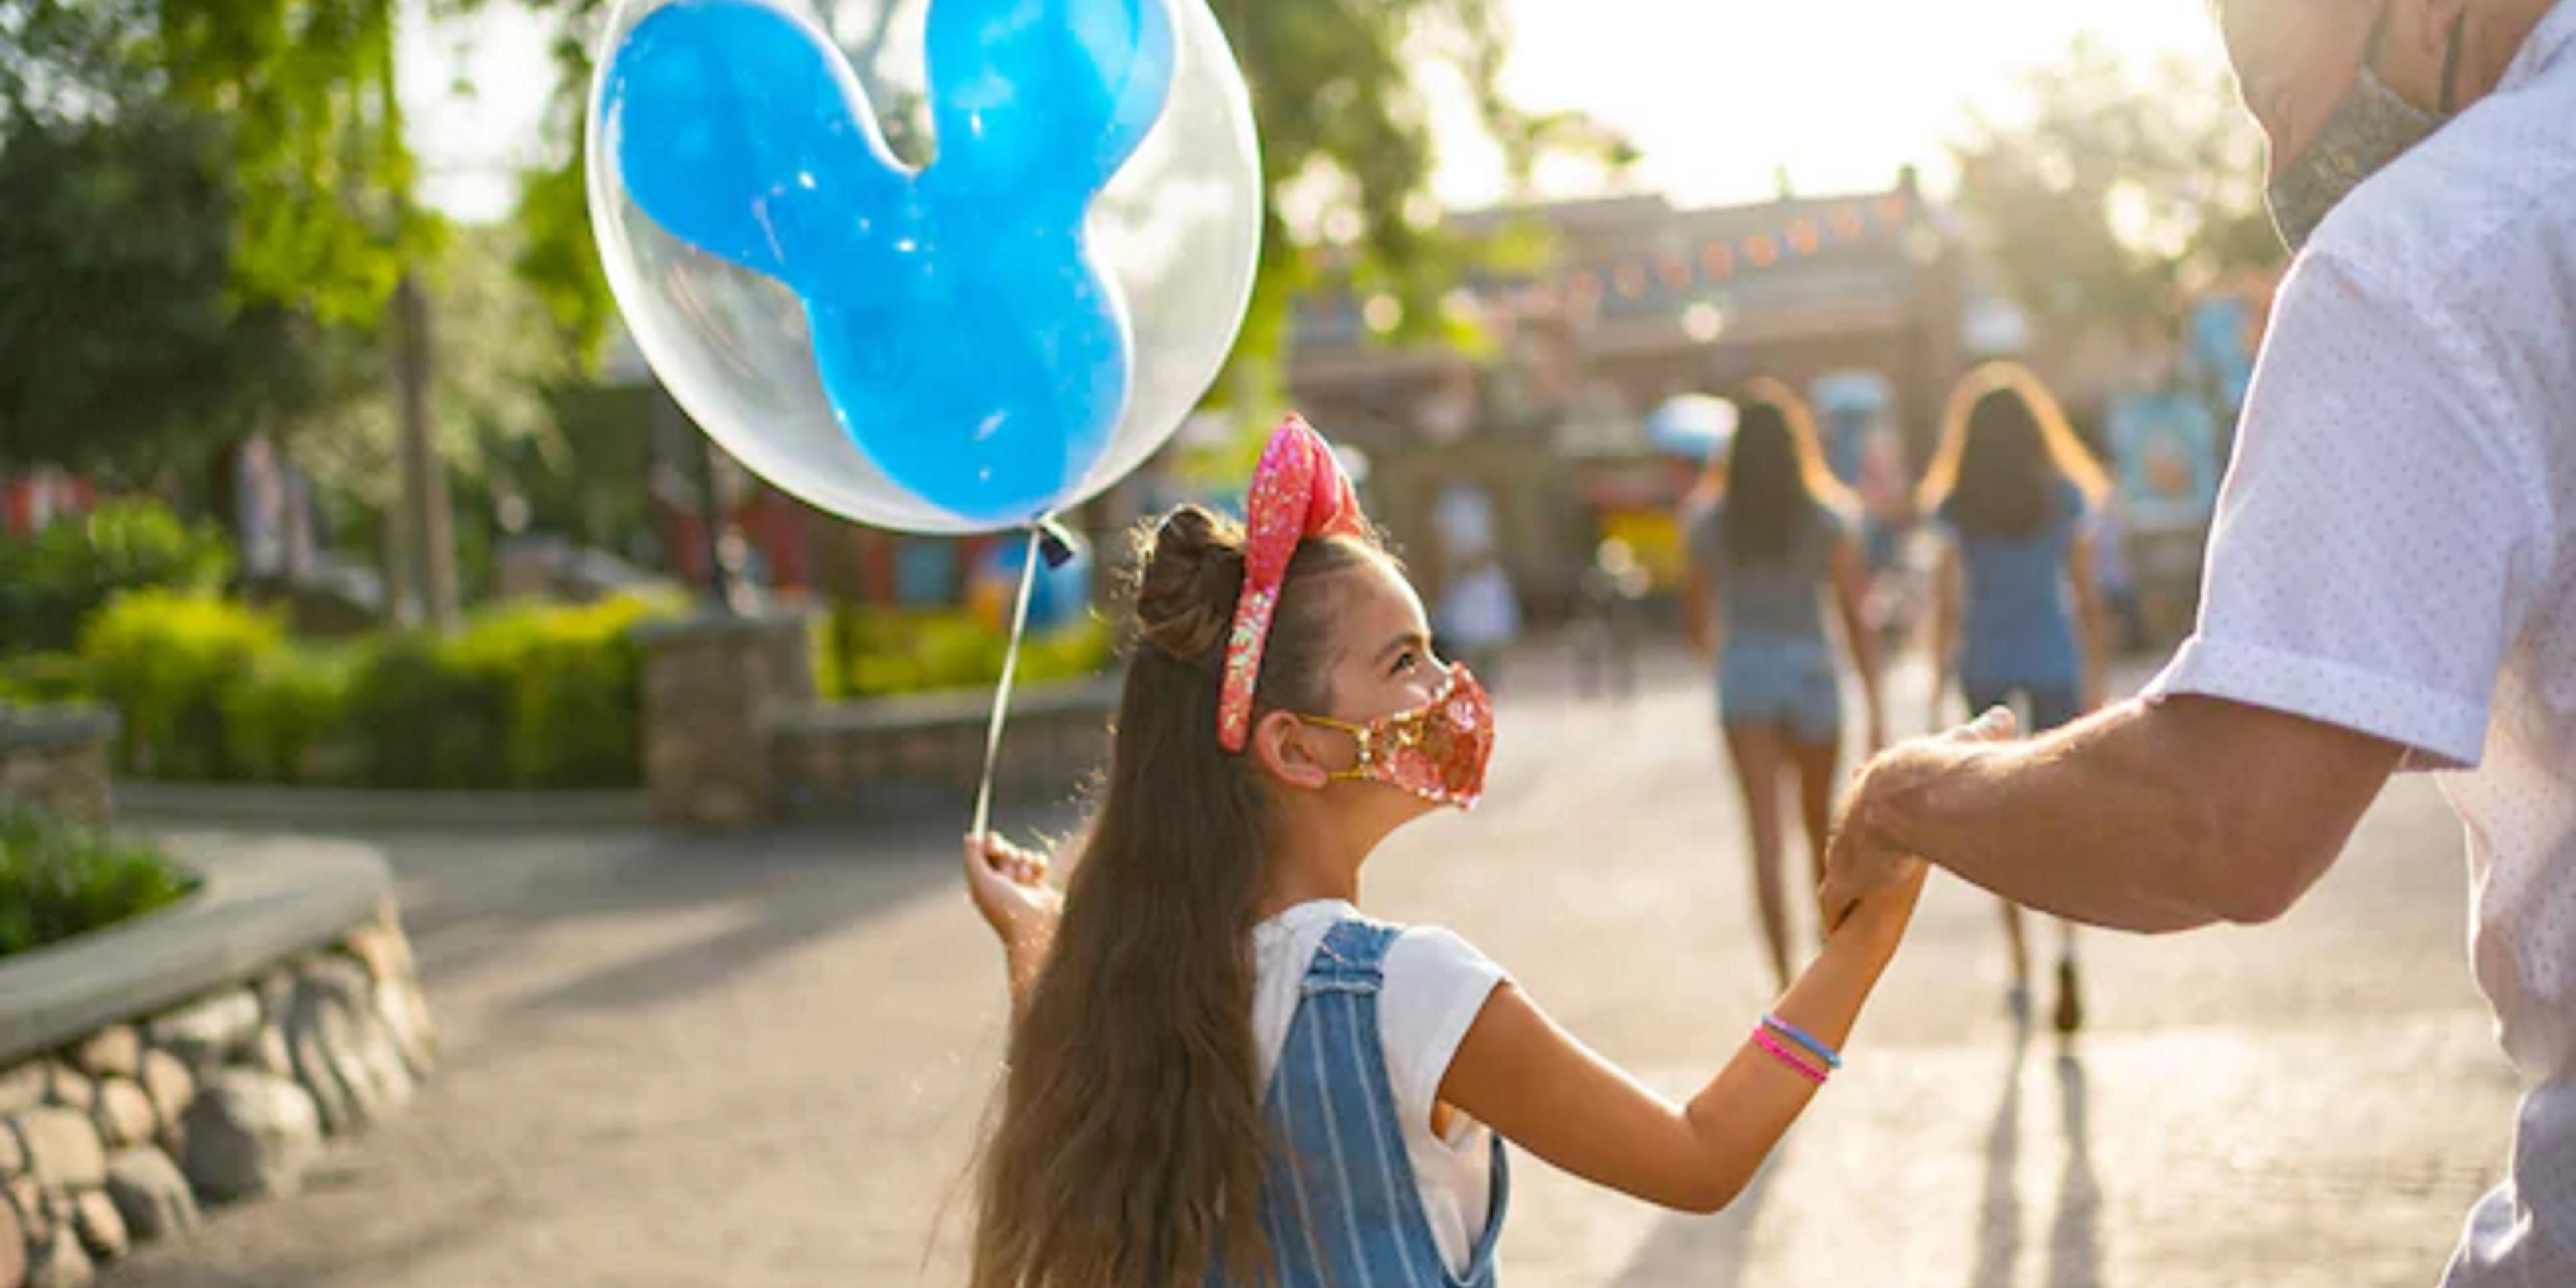 Welcoming You Back to the Downtown Disney District! A variety of shopping and dining experiences has begun to reopen at the Downtown Disney District, including an expansion onto Buena Vista Street.